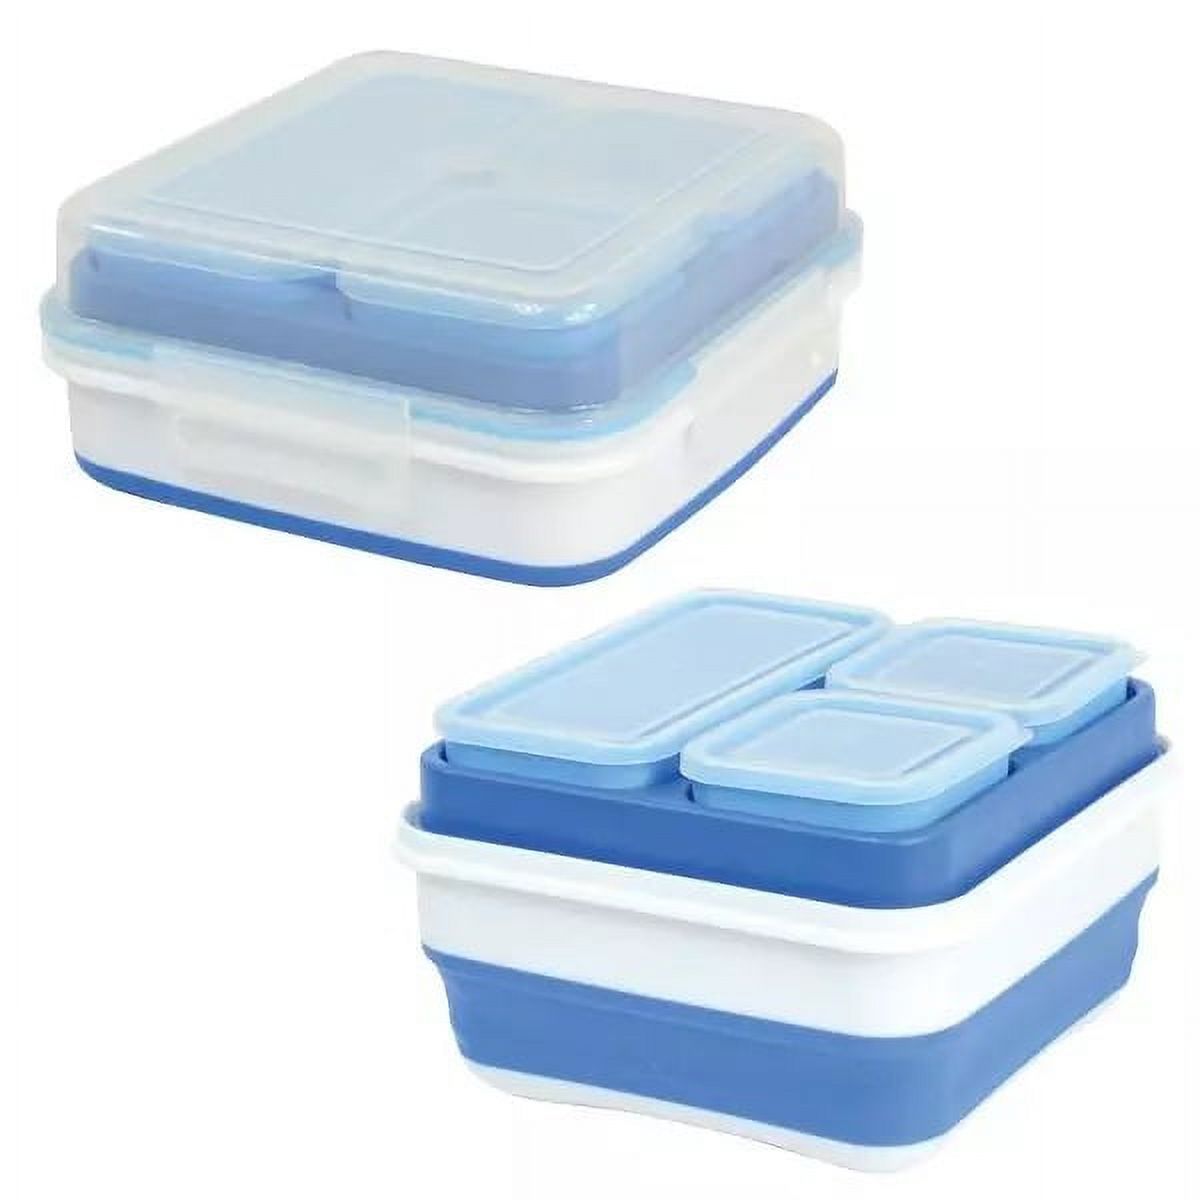 Cool Gear Expandable Bento Lunch Box - image 1 of 2